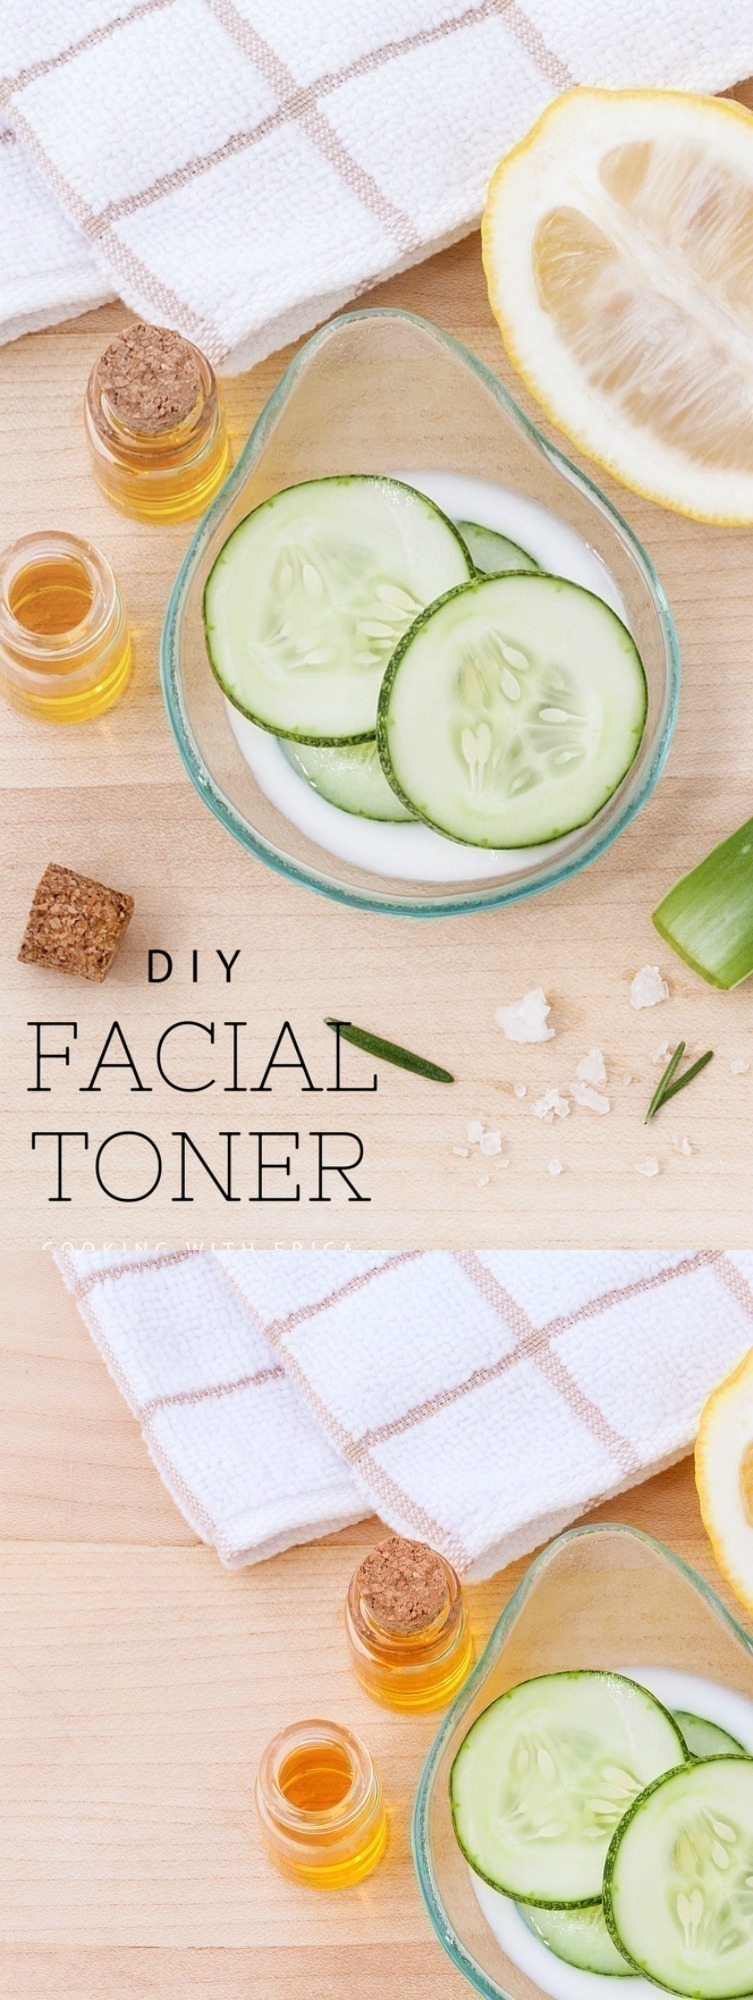 Using Apple Cider Vinegar in your toner can tighten your skin, help even out your tone, balance your pH and even help reduce signs of acne and troubled skin. Use it to throw together this easy facial toner!